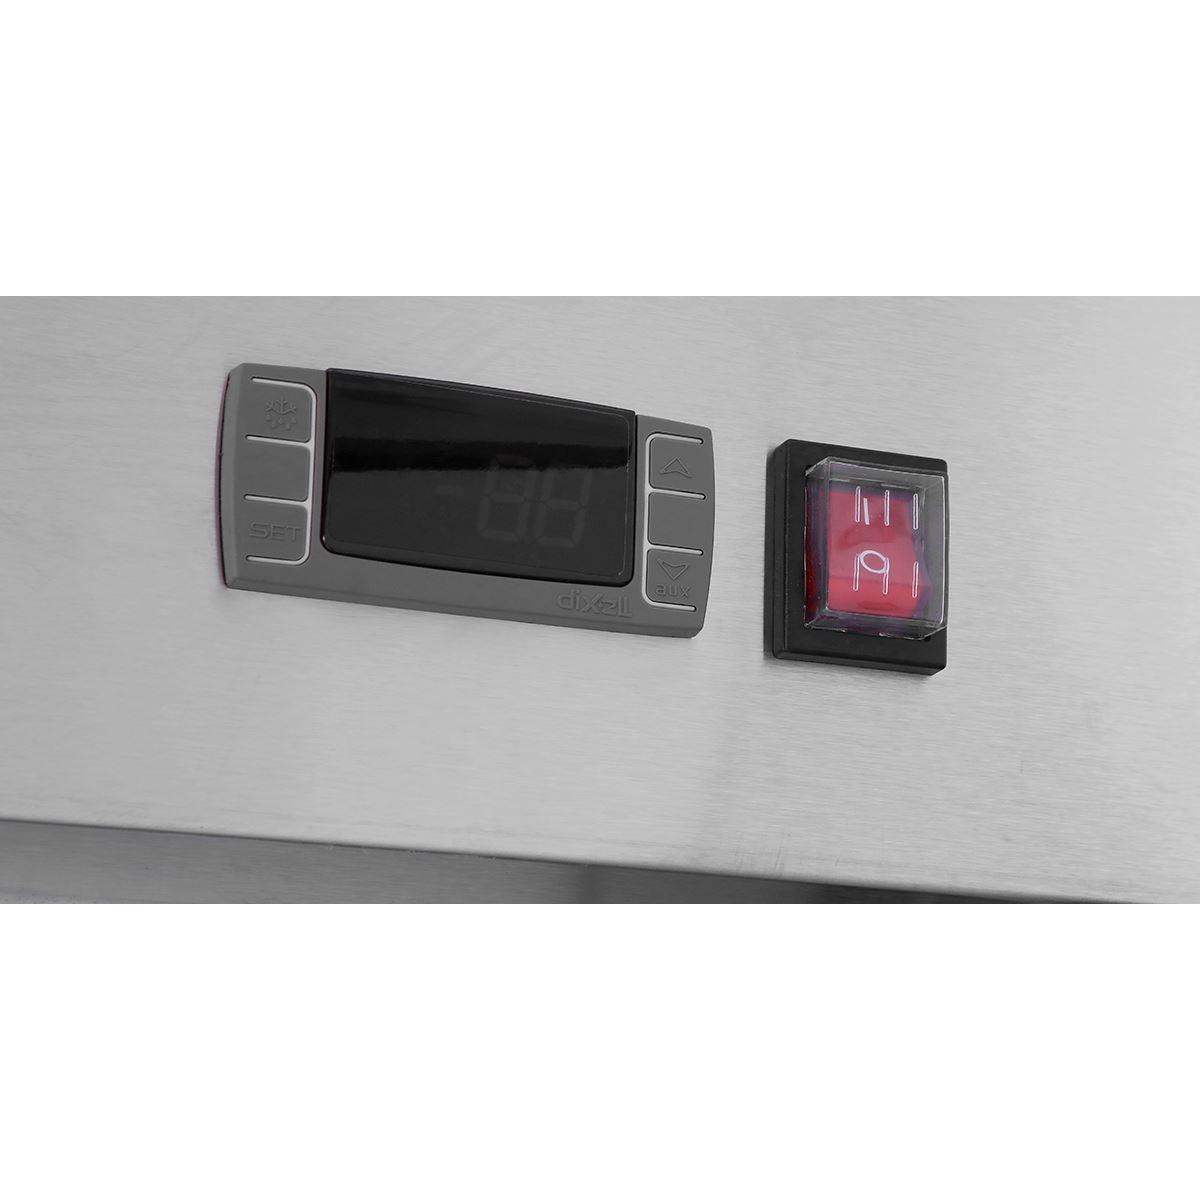 Atosa MBF8507GR Two Door 54" Reach-In Refrigerator Bottom Mount Series - TheChefStore.Com